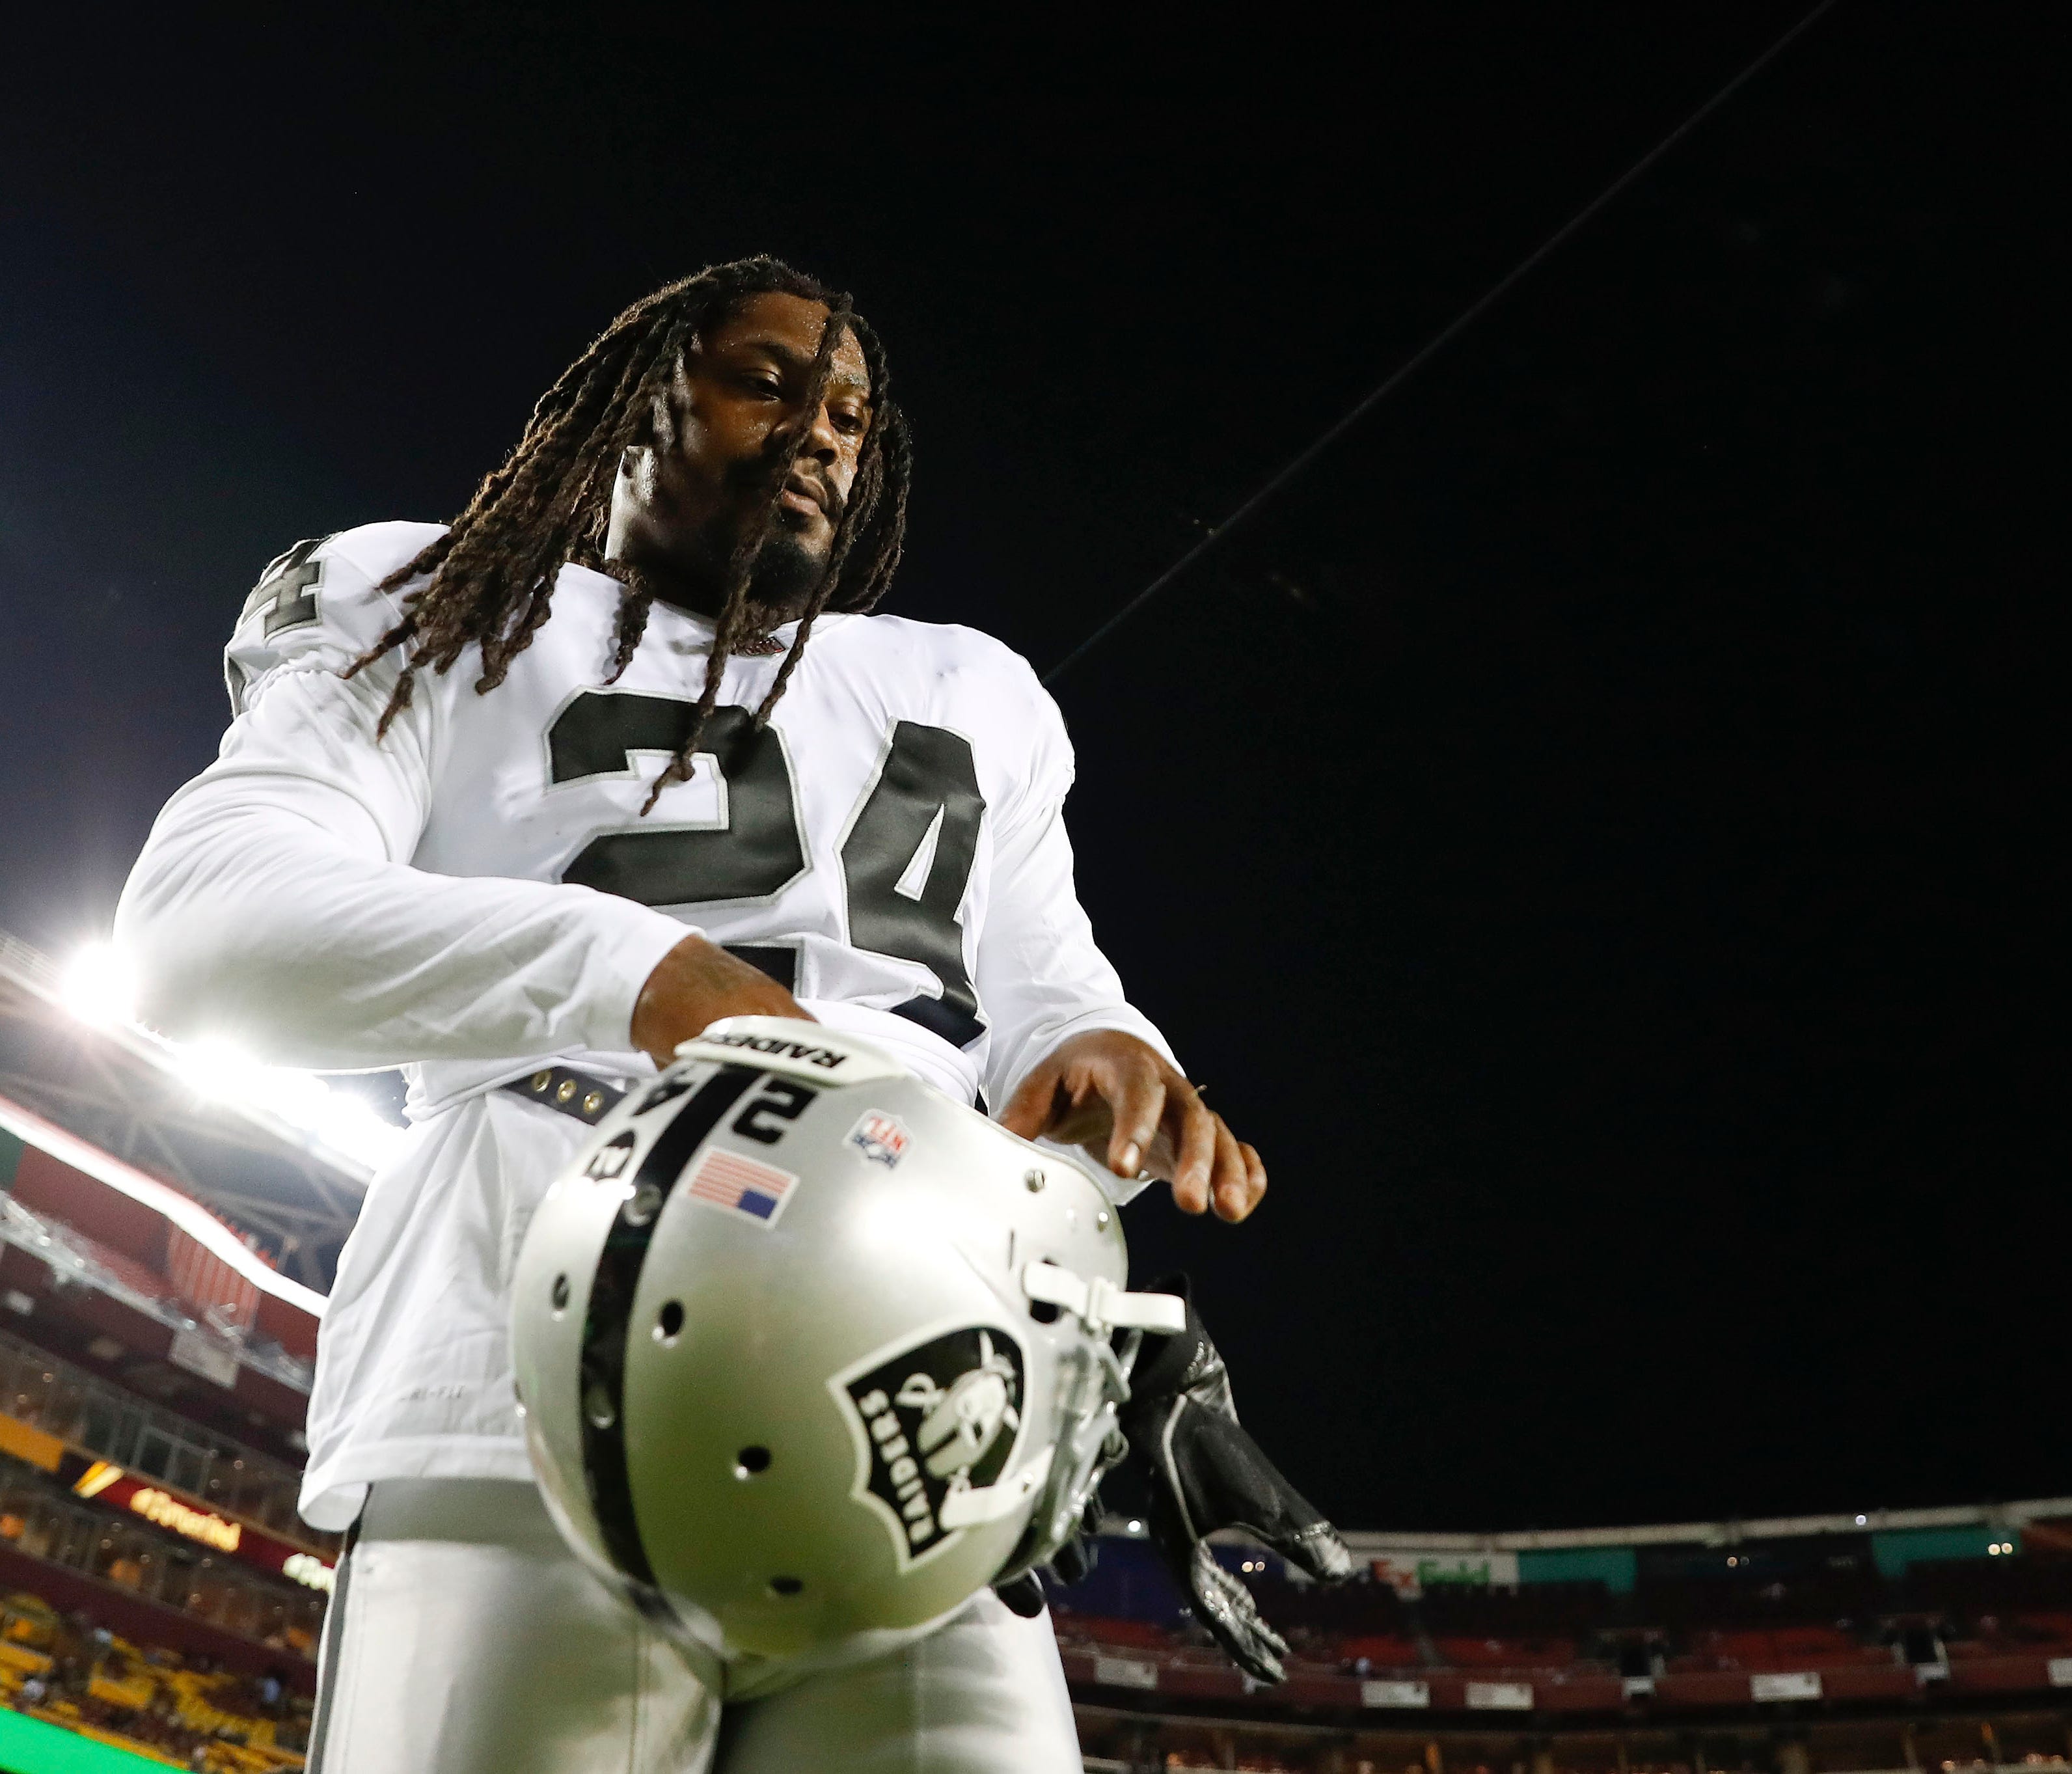 Oakland Raiders running back Marshawn Lynch (24) puts on his helmet before an NFL football game against the Washington Redskins in Landover, Md., Sunday, Sept. 24, 2017. (AP Photo/Alex Brandon) ORG XMIT: NYOTK137